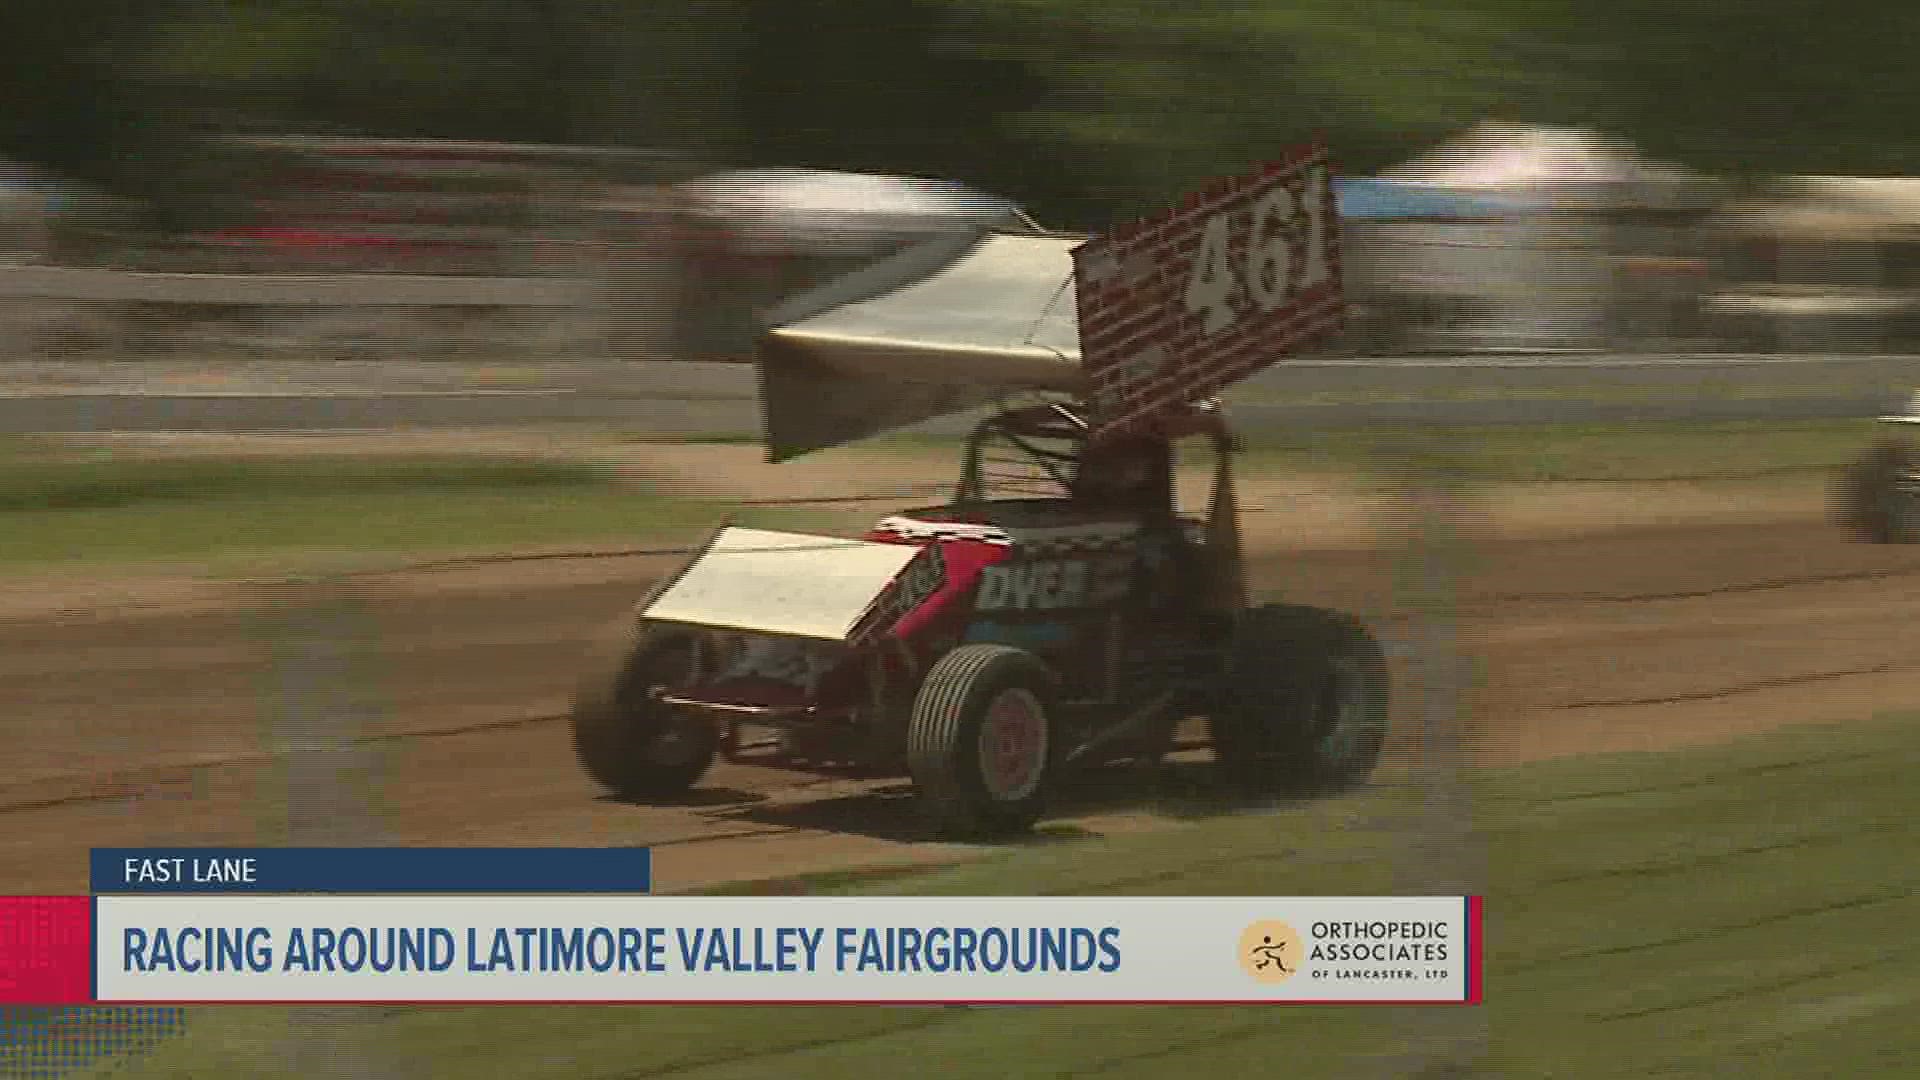 A few times a year, the Latimore Valley Fairgrounds rebirth with action on the track